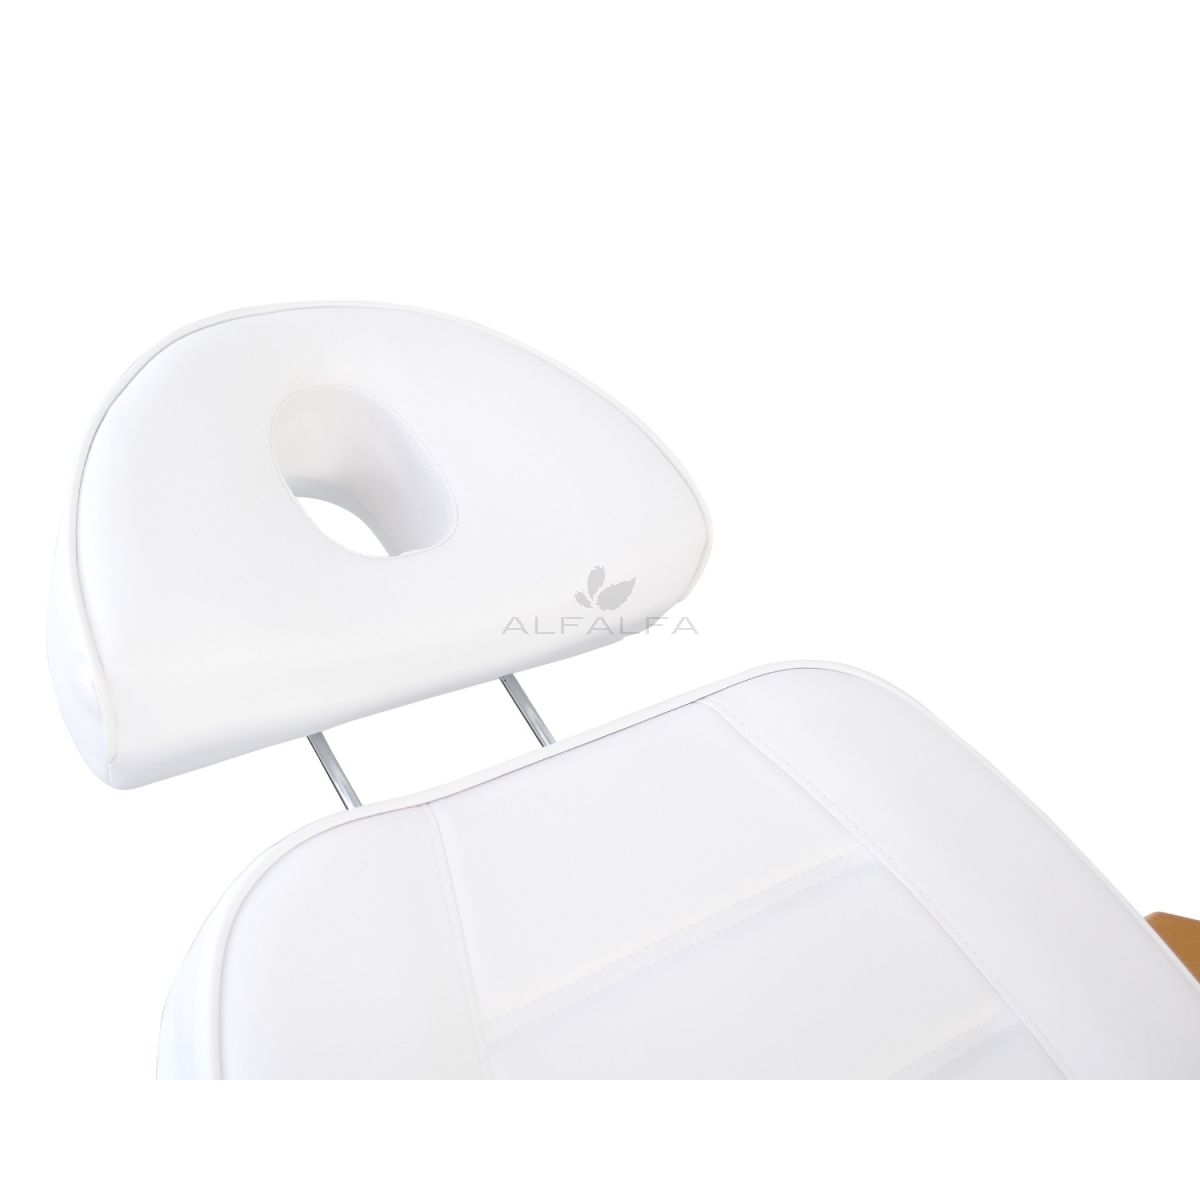 Facial Beauty Chair & Wooden Armrests w/ 3 Motors - White